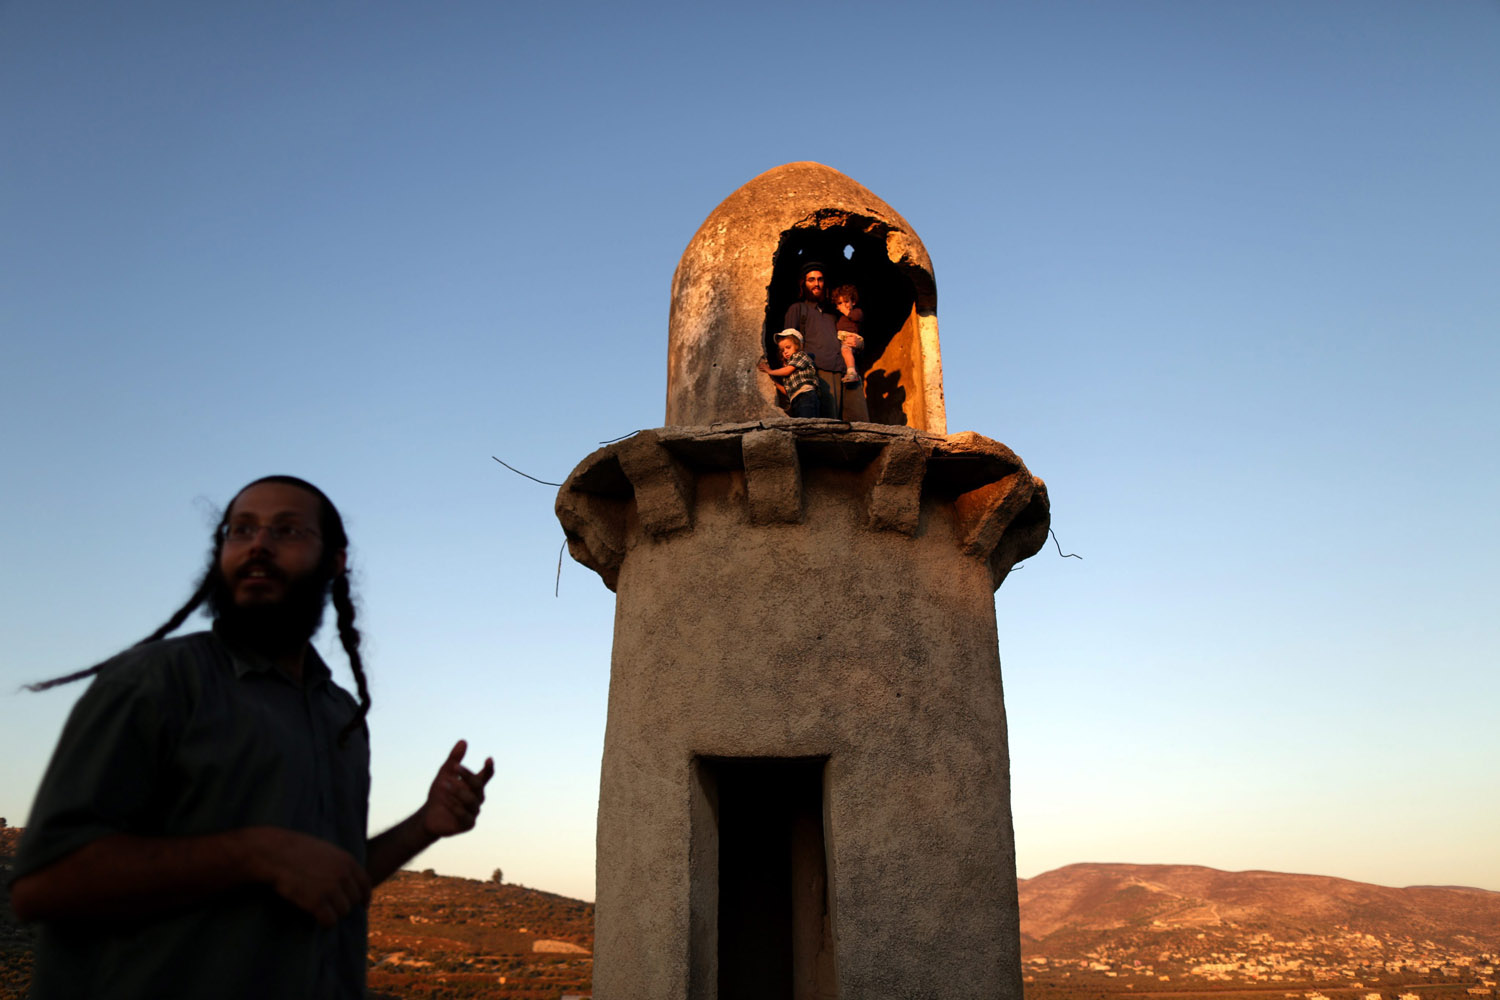 July 28, 2013. A Jewish settlers in a minaret of an ancient mosque at the former settlement of Sanur in northern Samaria, near the West Bank city of Jenin.